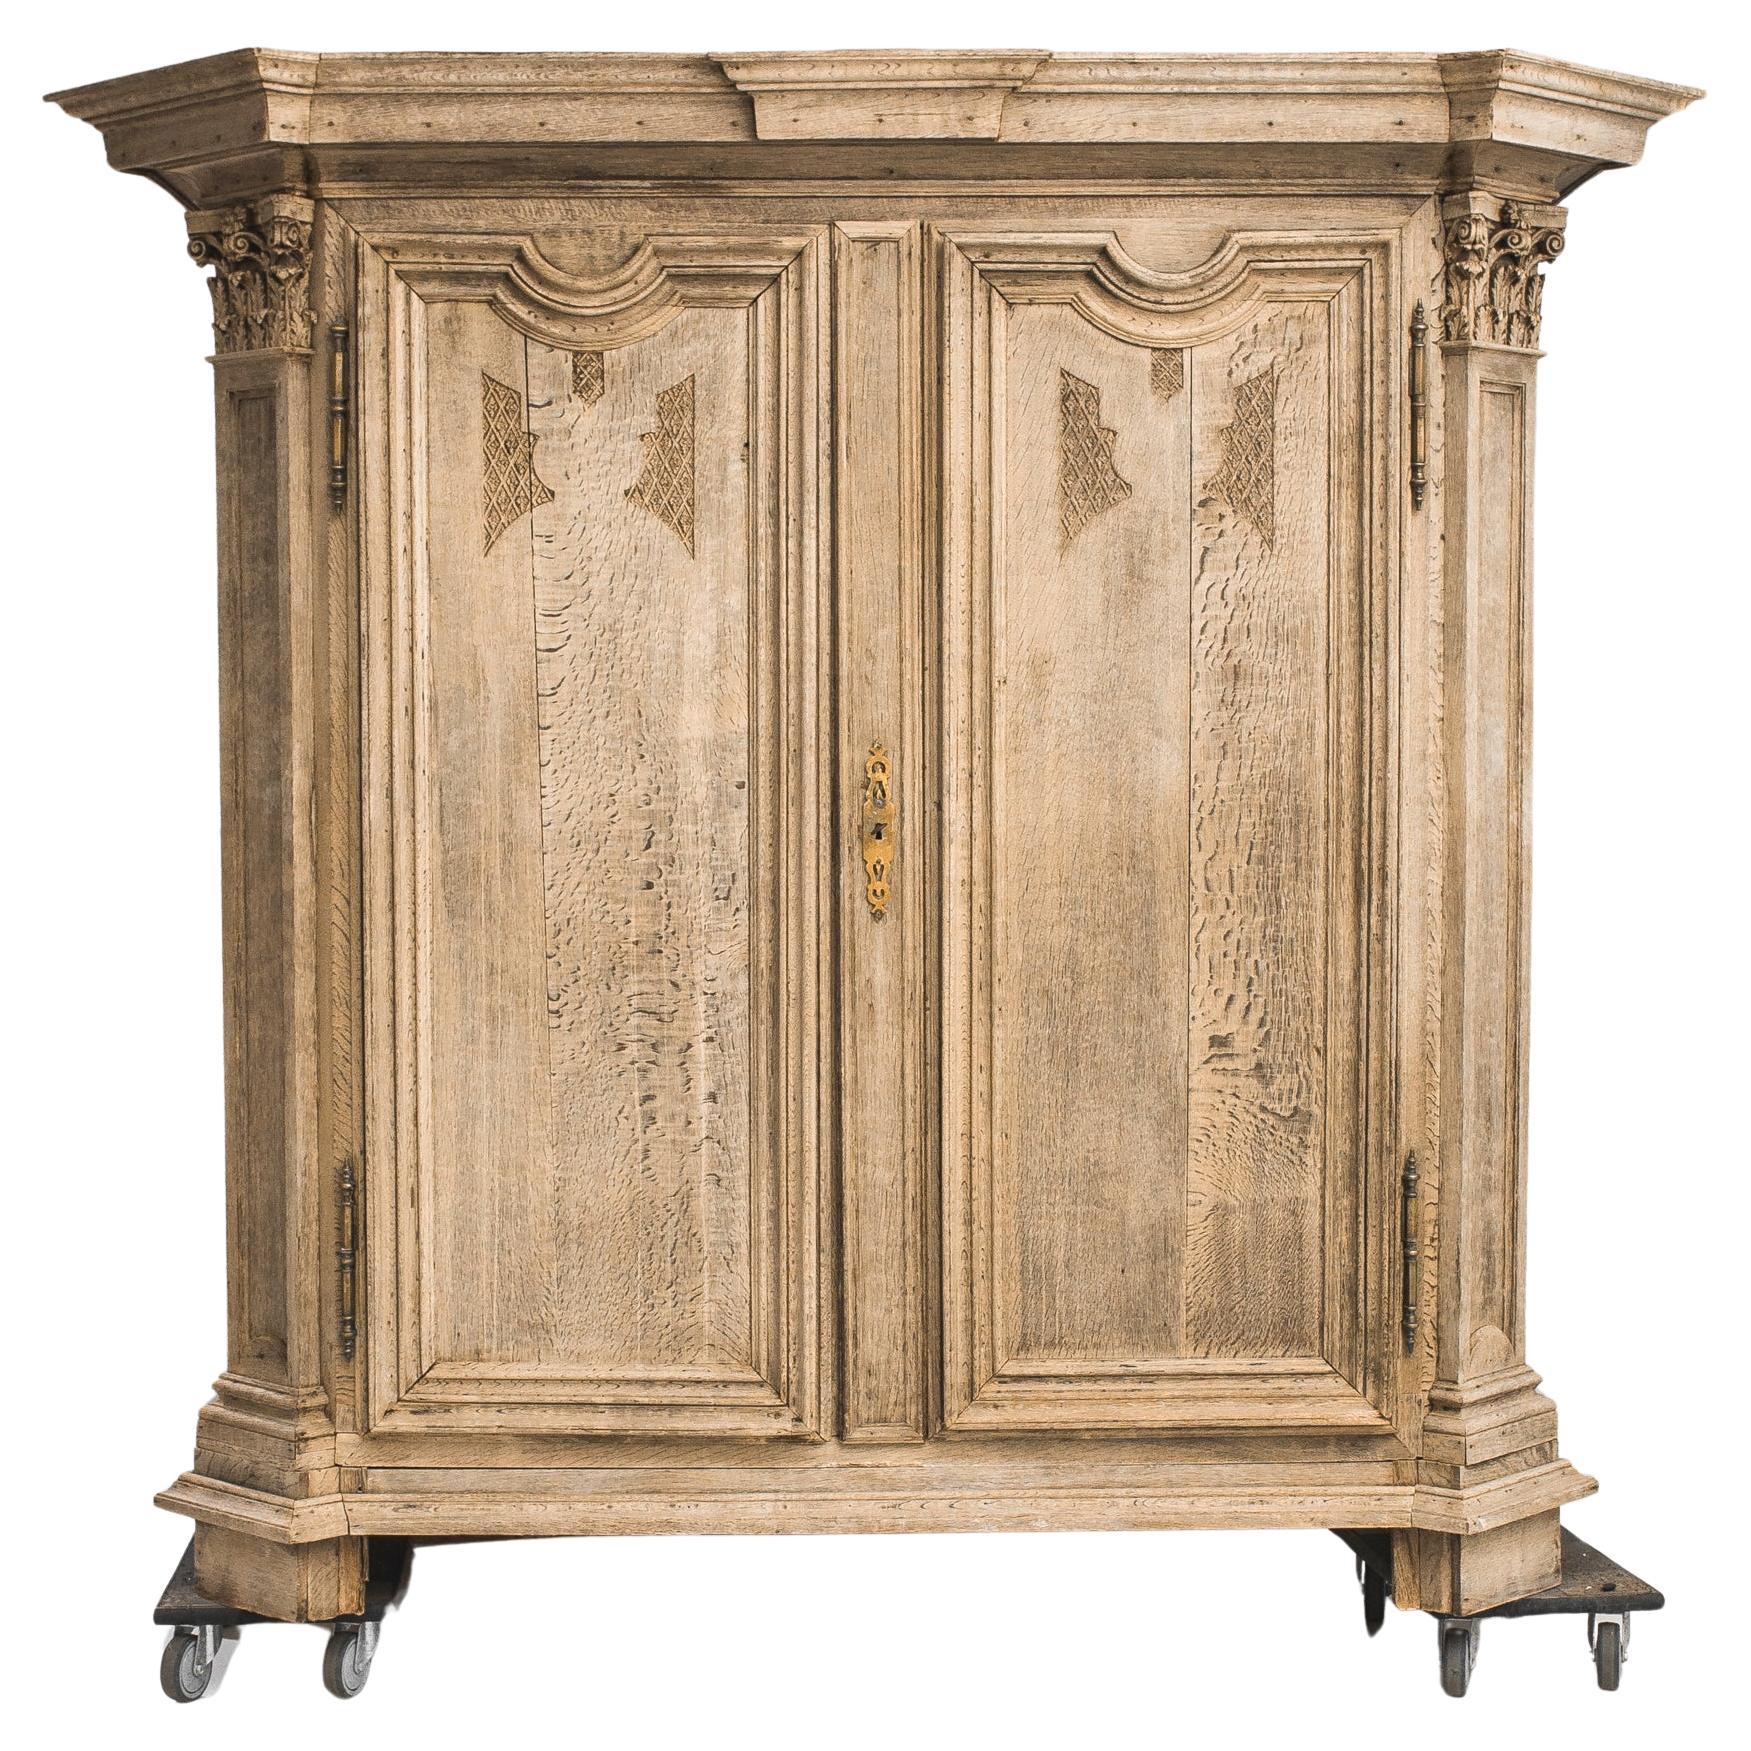 Impressive in stature, the 19th Century French Bleached Oak Armoire exudes grandeur and timeless allure. Opening its two doors reveals a spacious interior boasting four shelves, providing ample storage. The armoire is crowned with molding at both